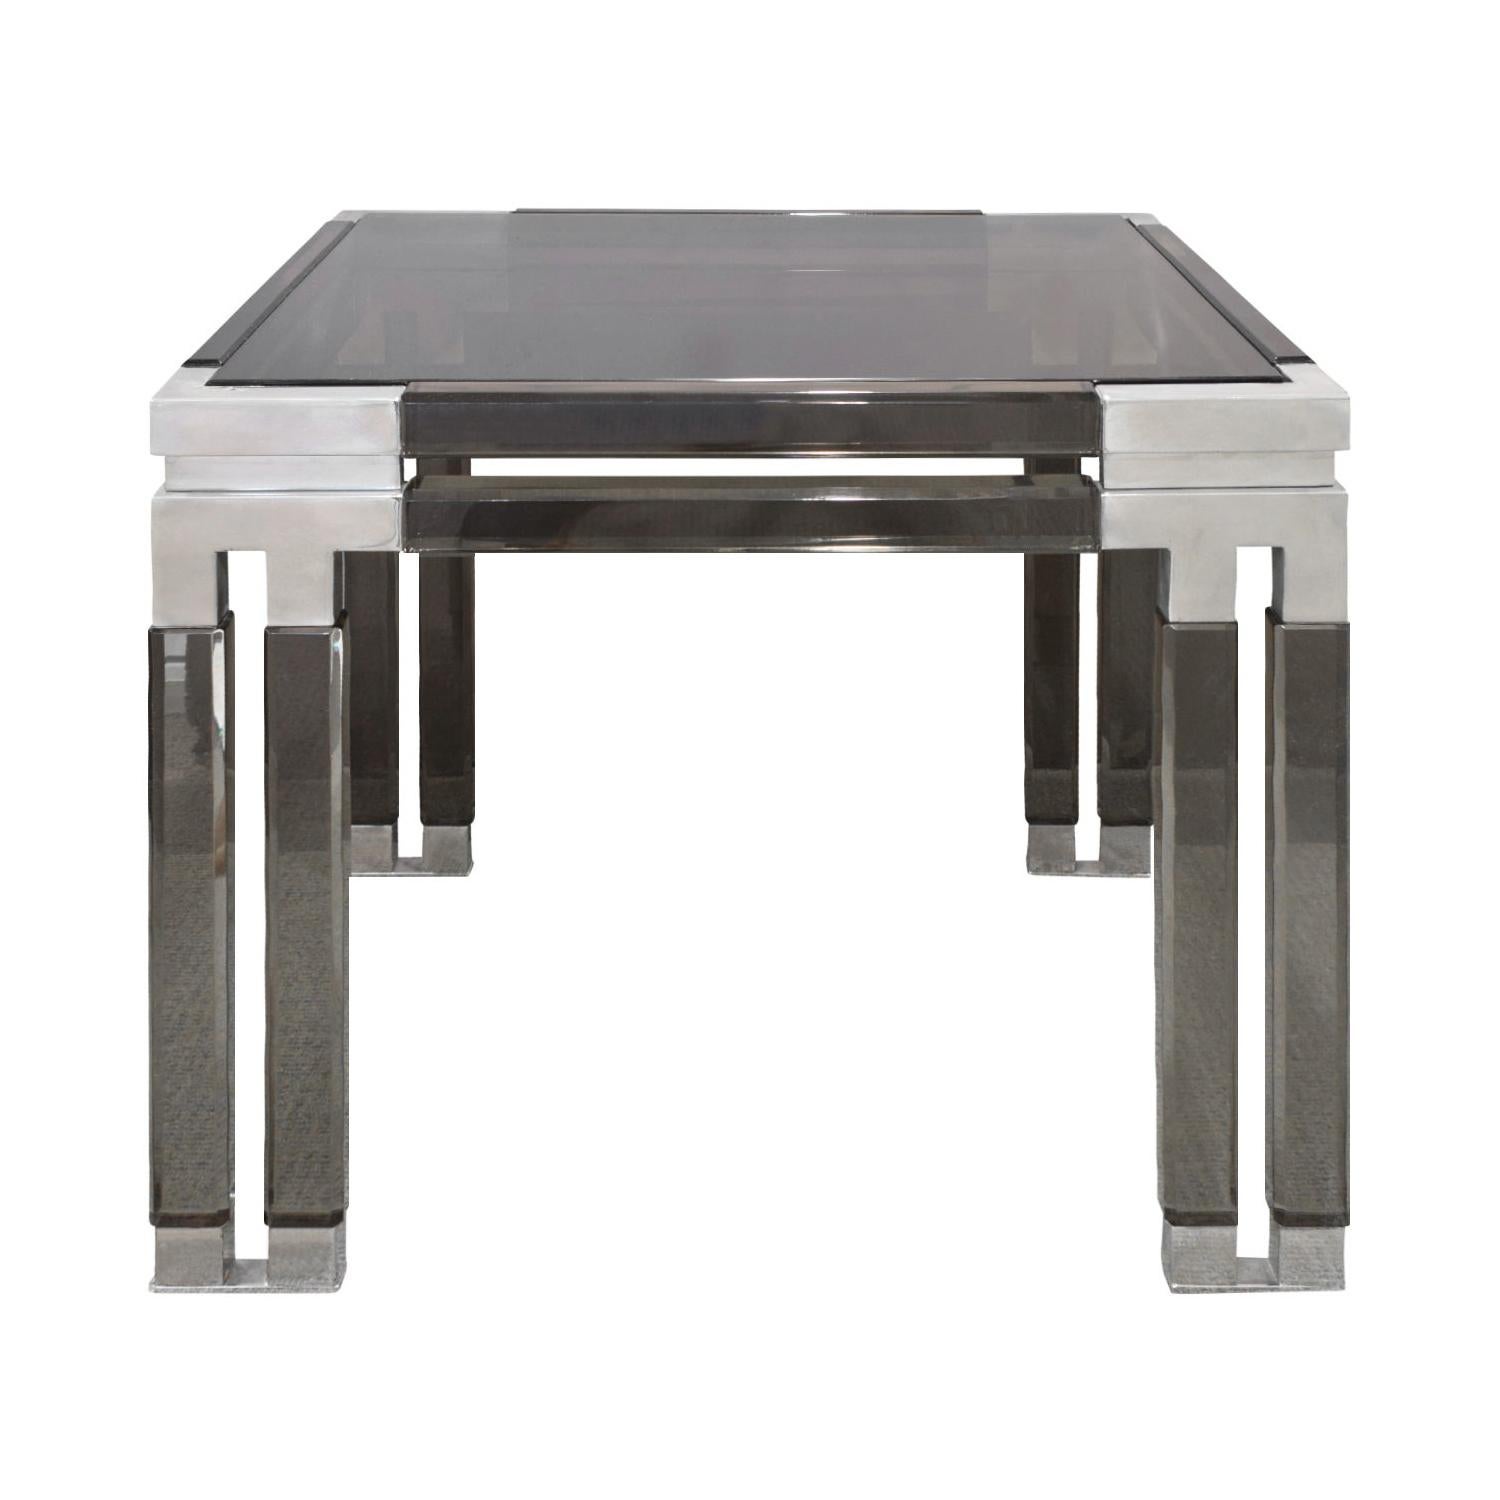 Paul Laszlo Chic Side Table in Smoke Lucite and Chrome, 1983 For Sale